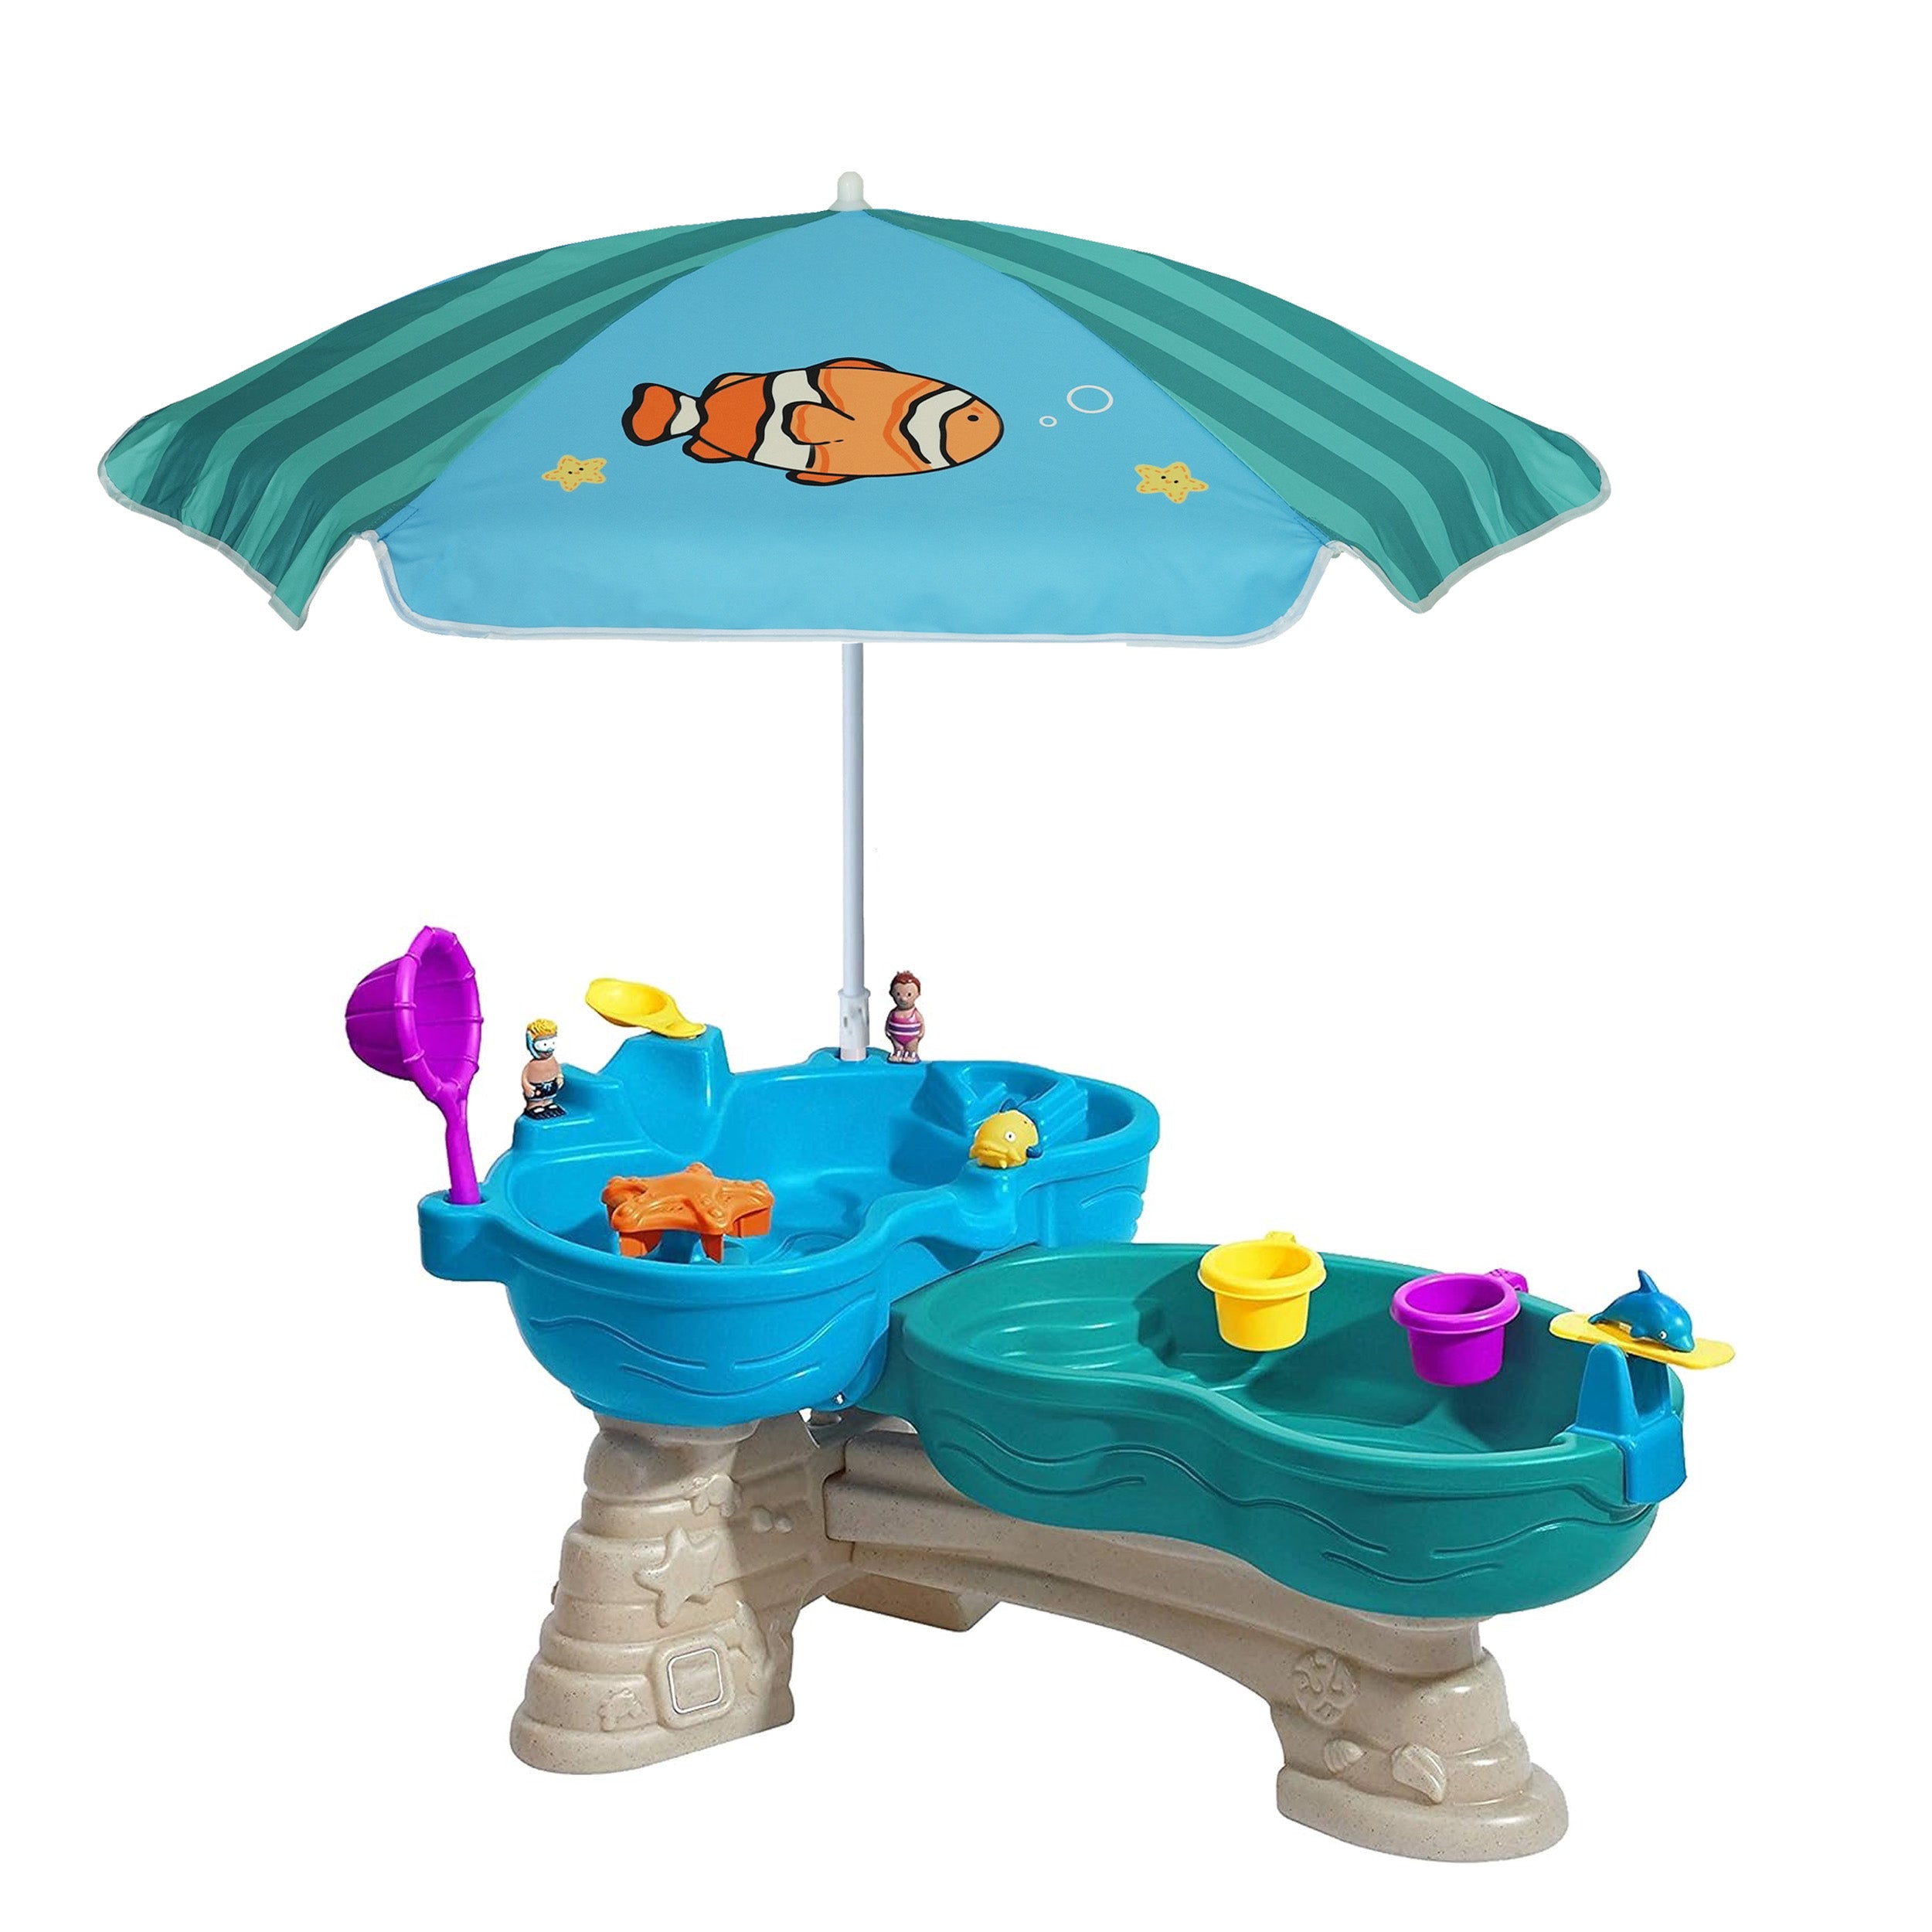 AMMSUN 47 inches kid Umbrella for Sand and Water Table Green Clownfish